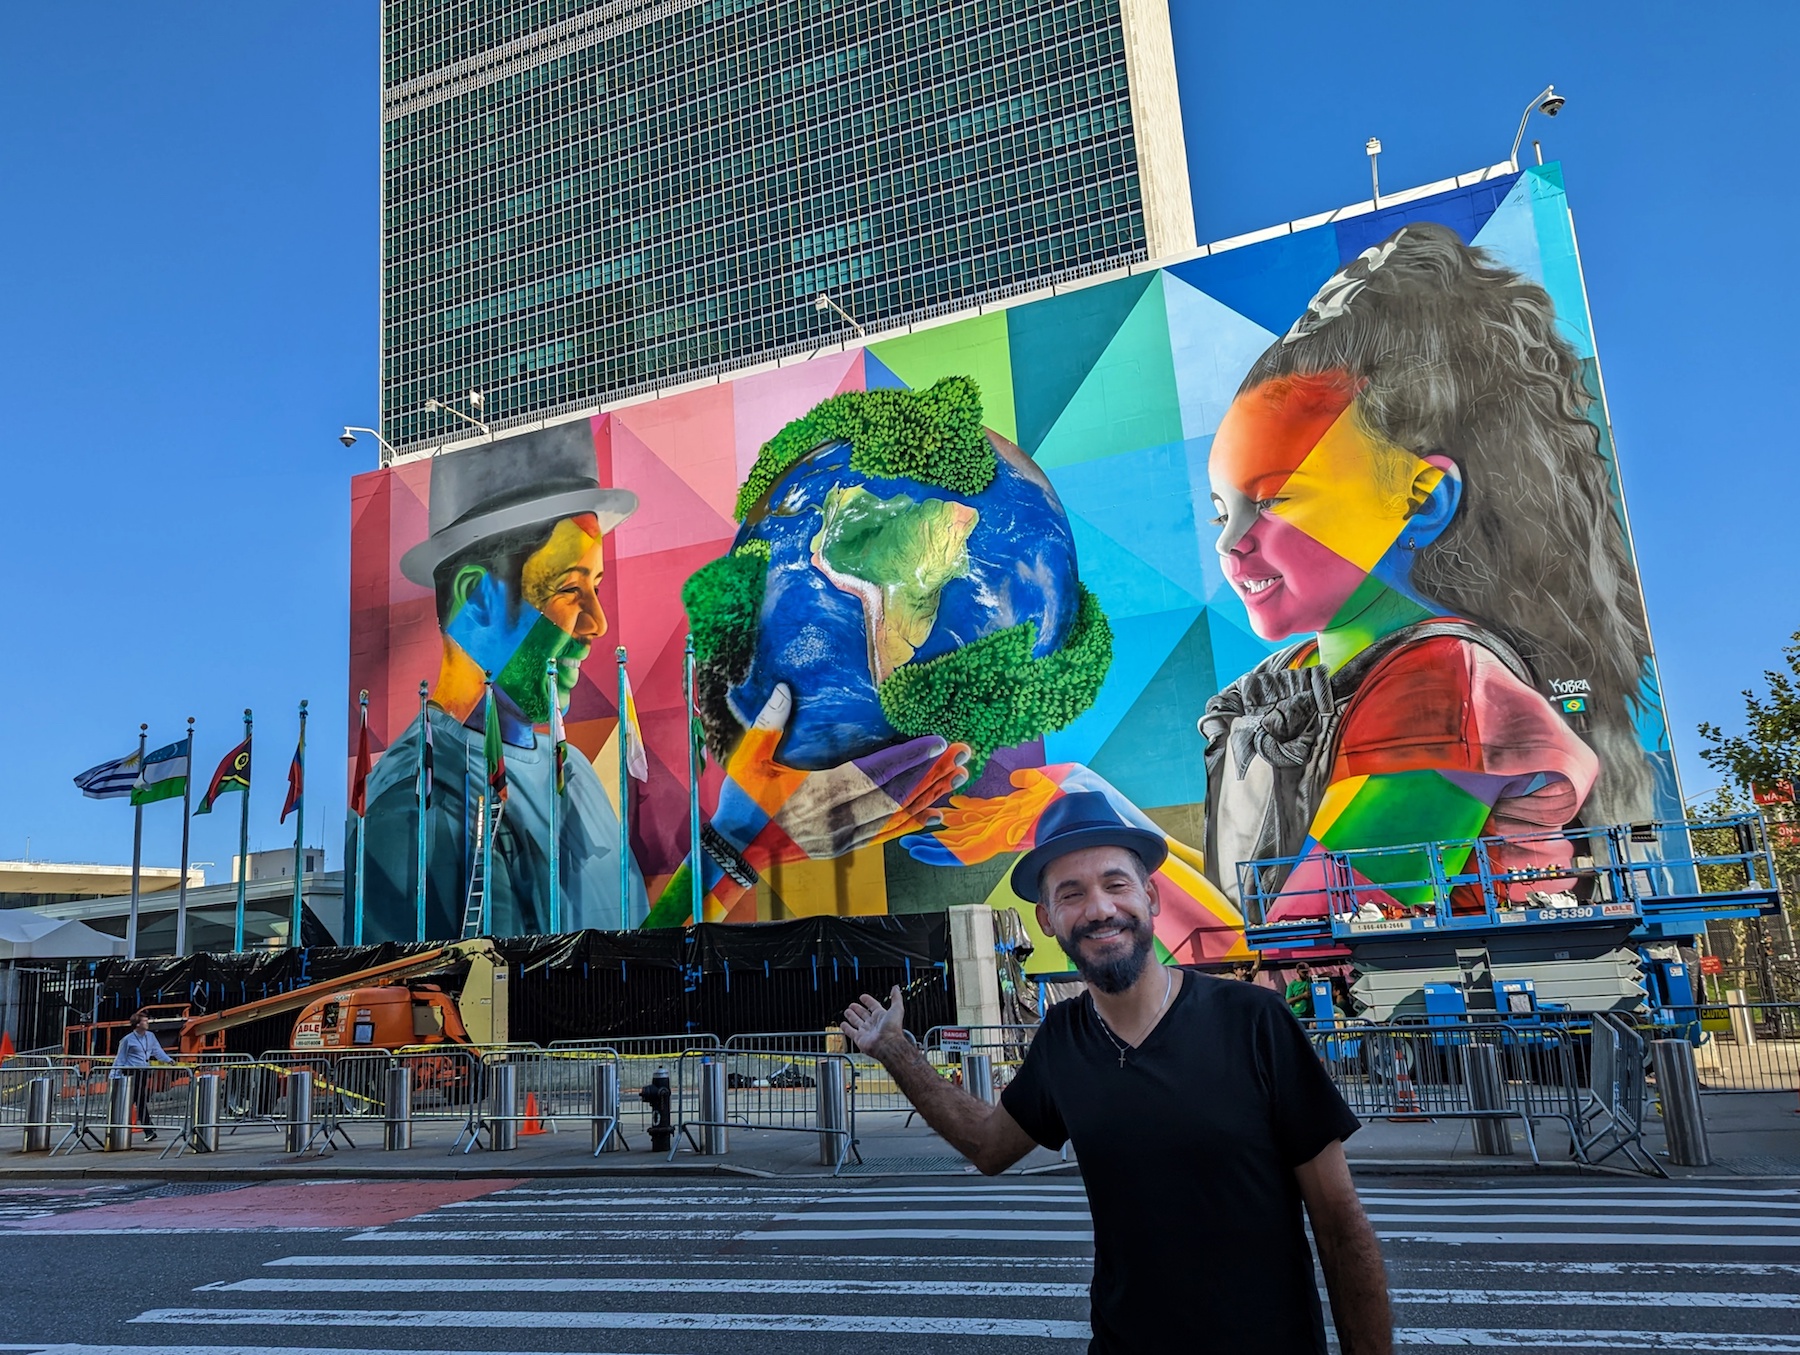 Street Artist Kobra invites us to reflect on what future we want to leave for future generations, NYC 2022